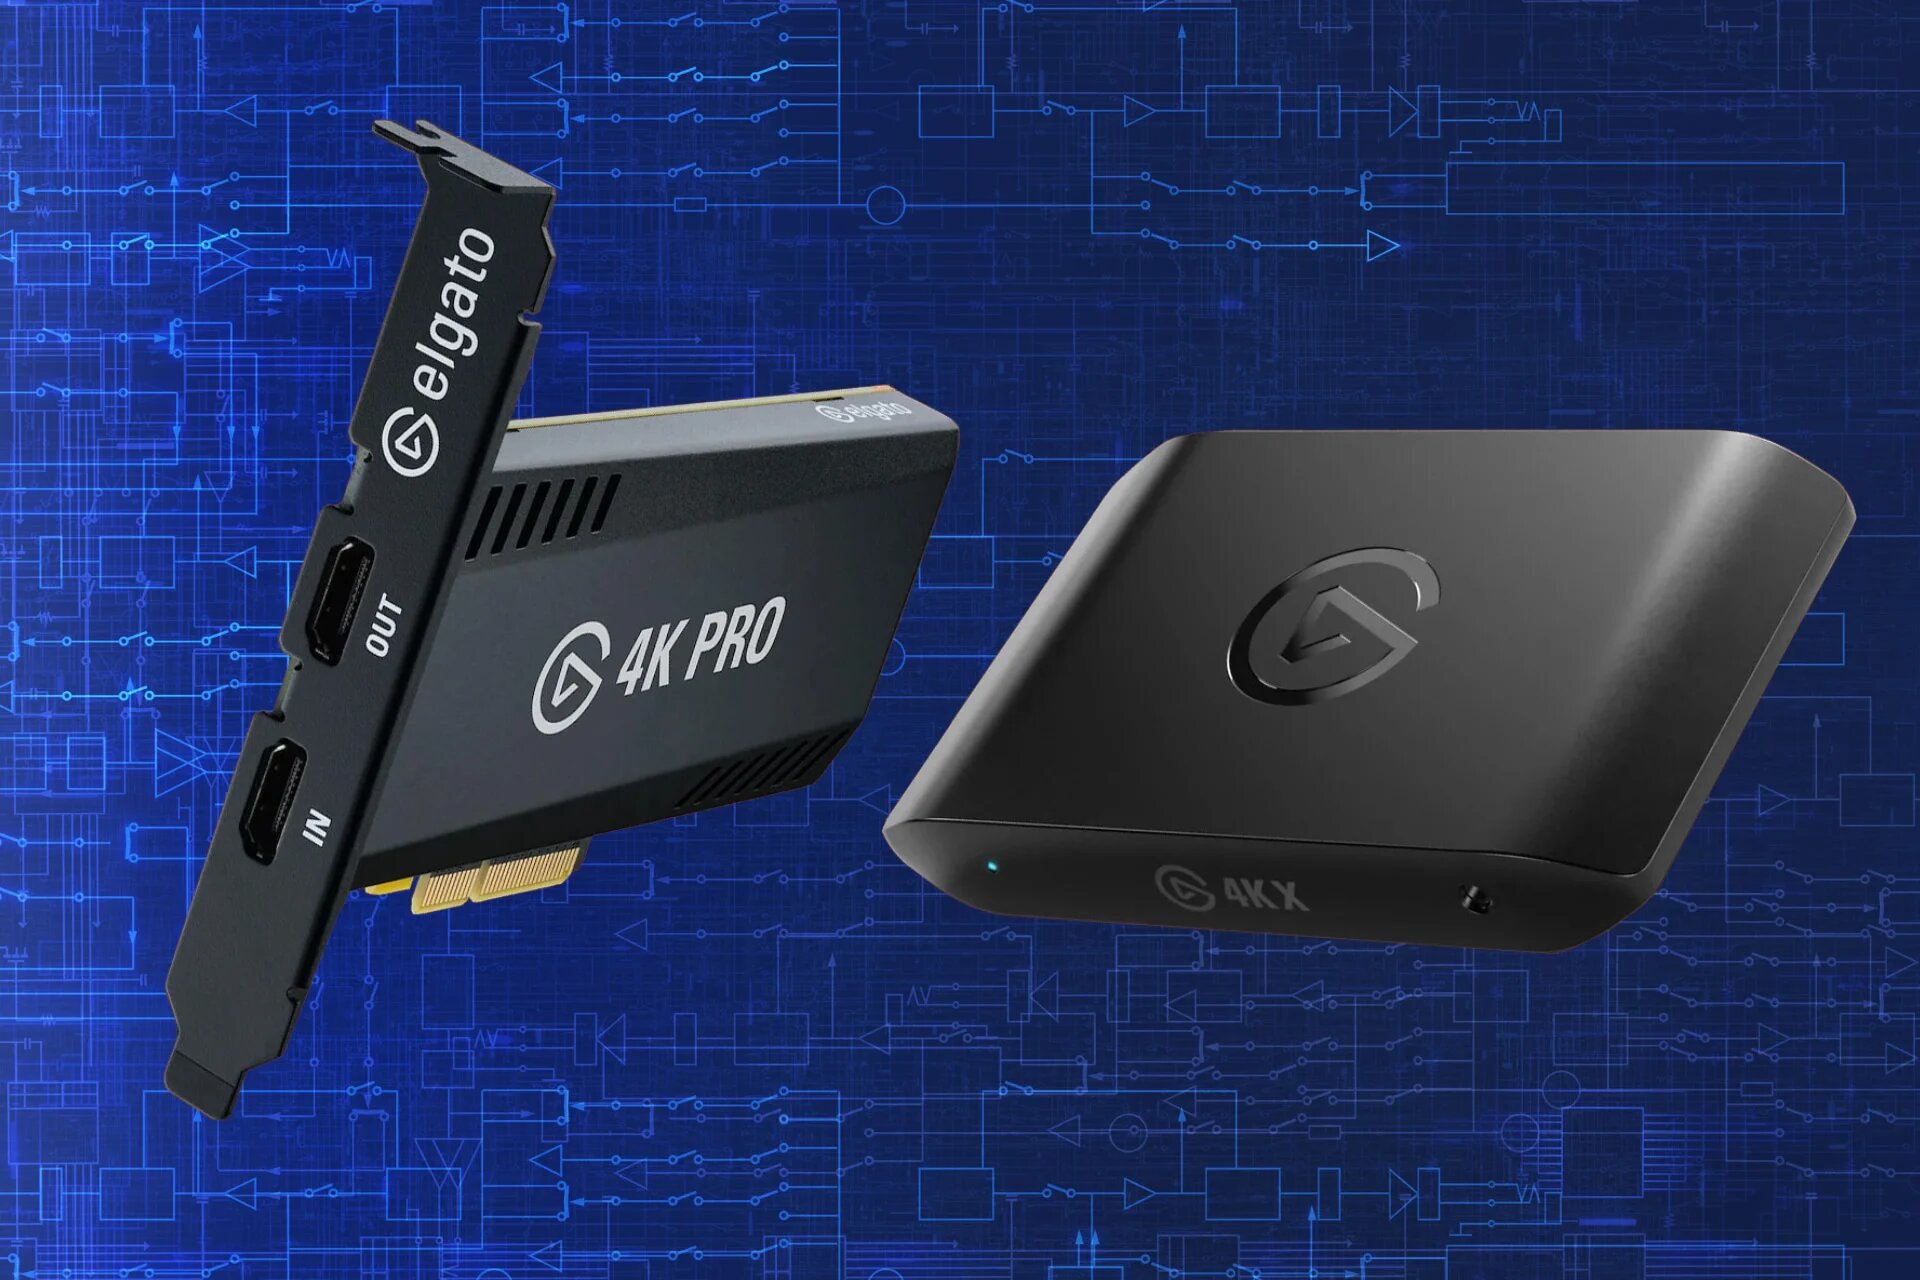 Elgato Offers High Performance with New 4K X and 4K Pro Capture Cards